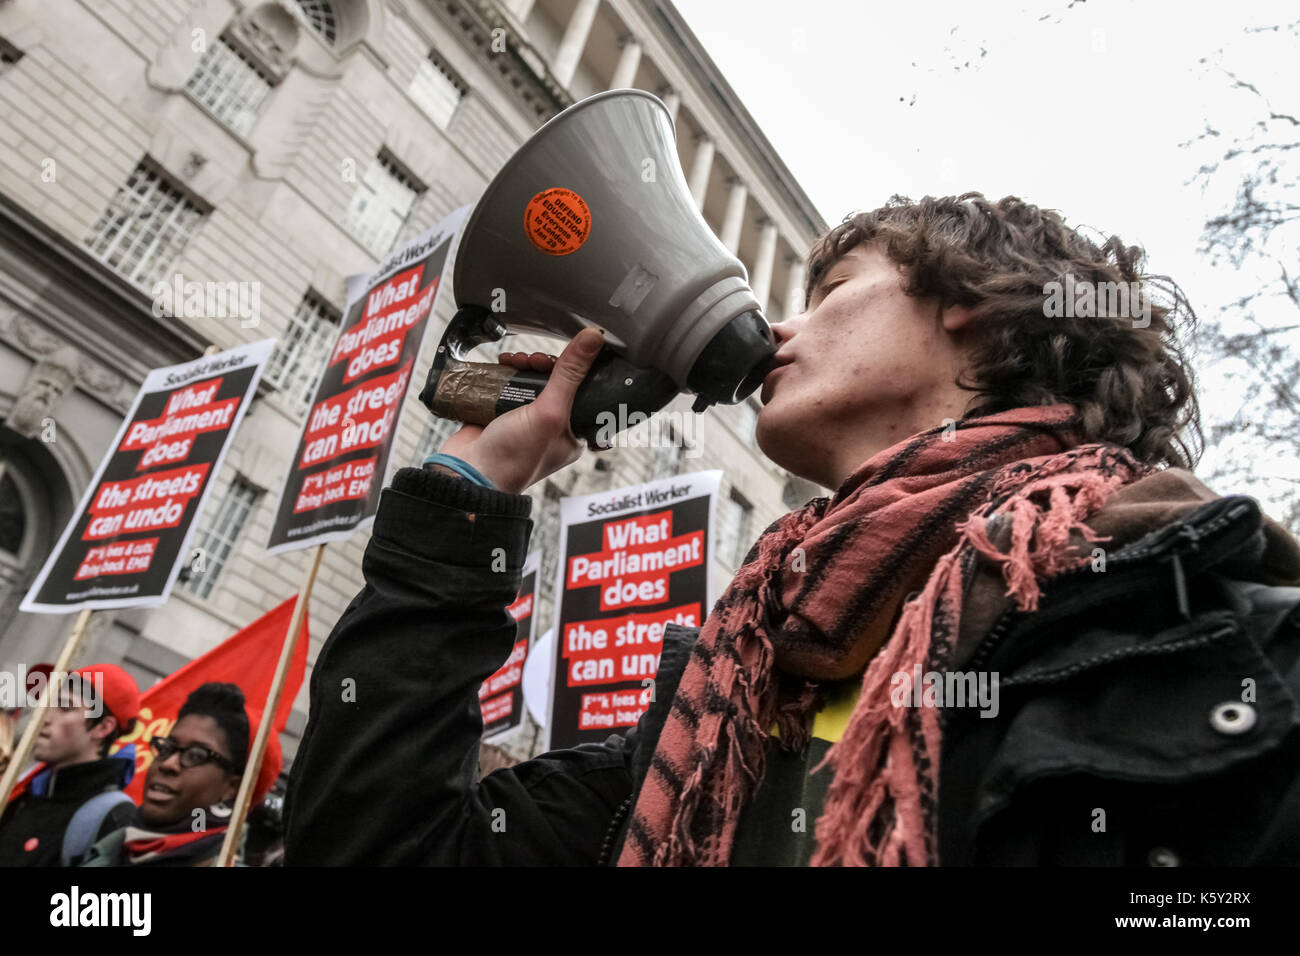 Students protest in central London against public spending cuts and the rise in tuition fees. Stock Photo